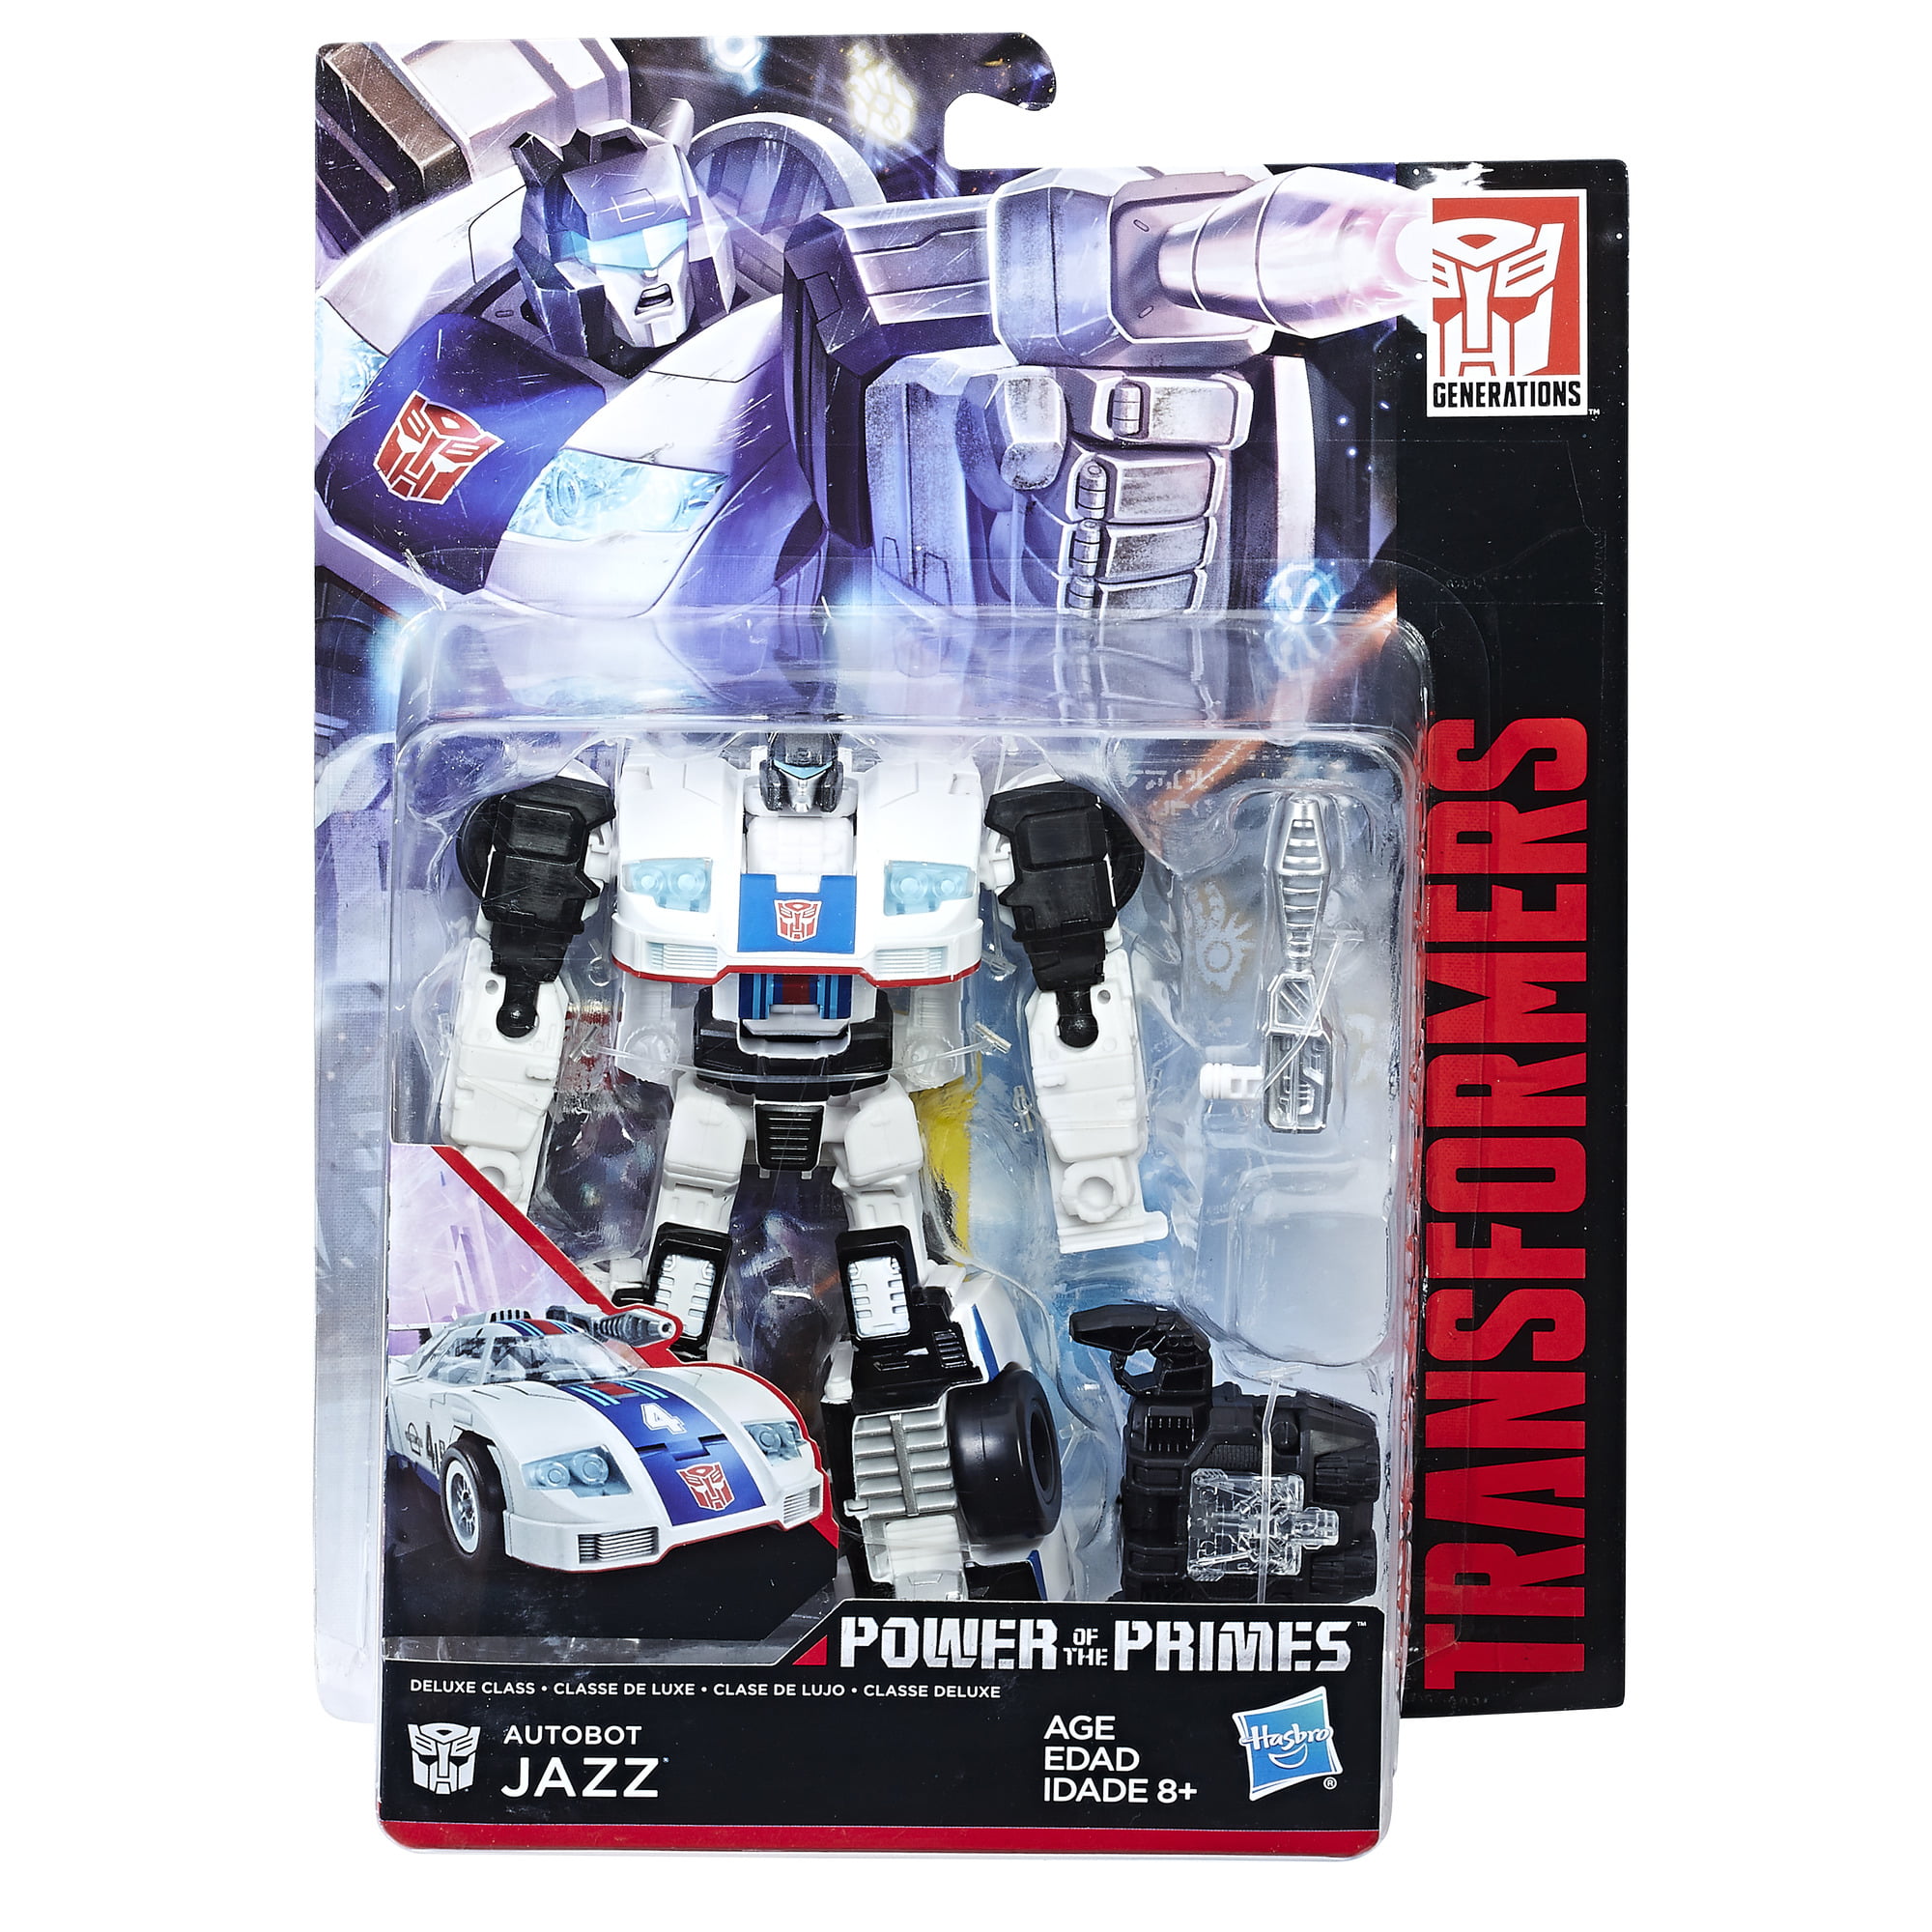 Transformers: Generations Power of the Primes Deluxe Class Autobot Jazz